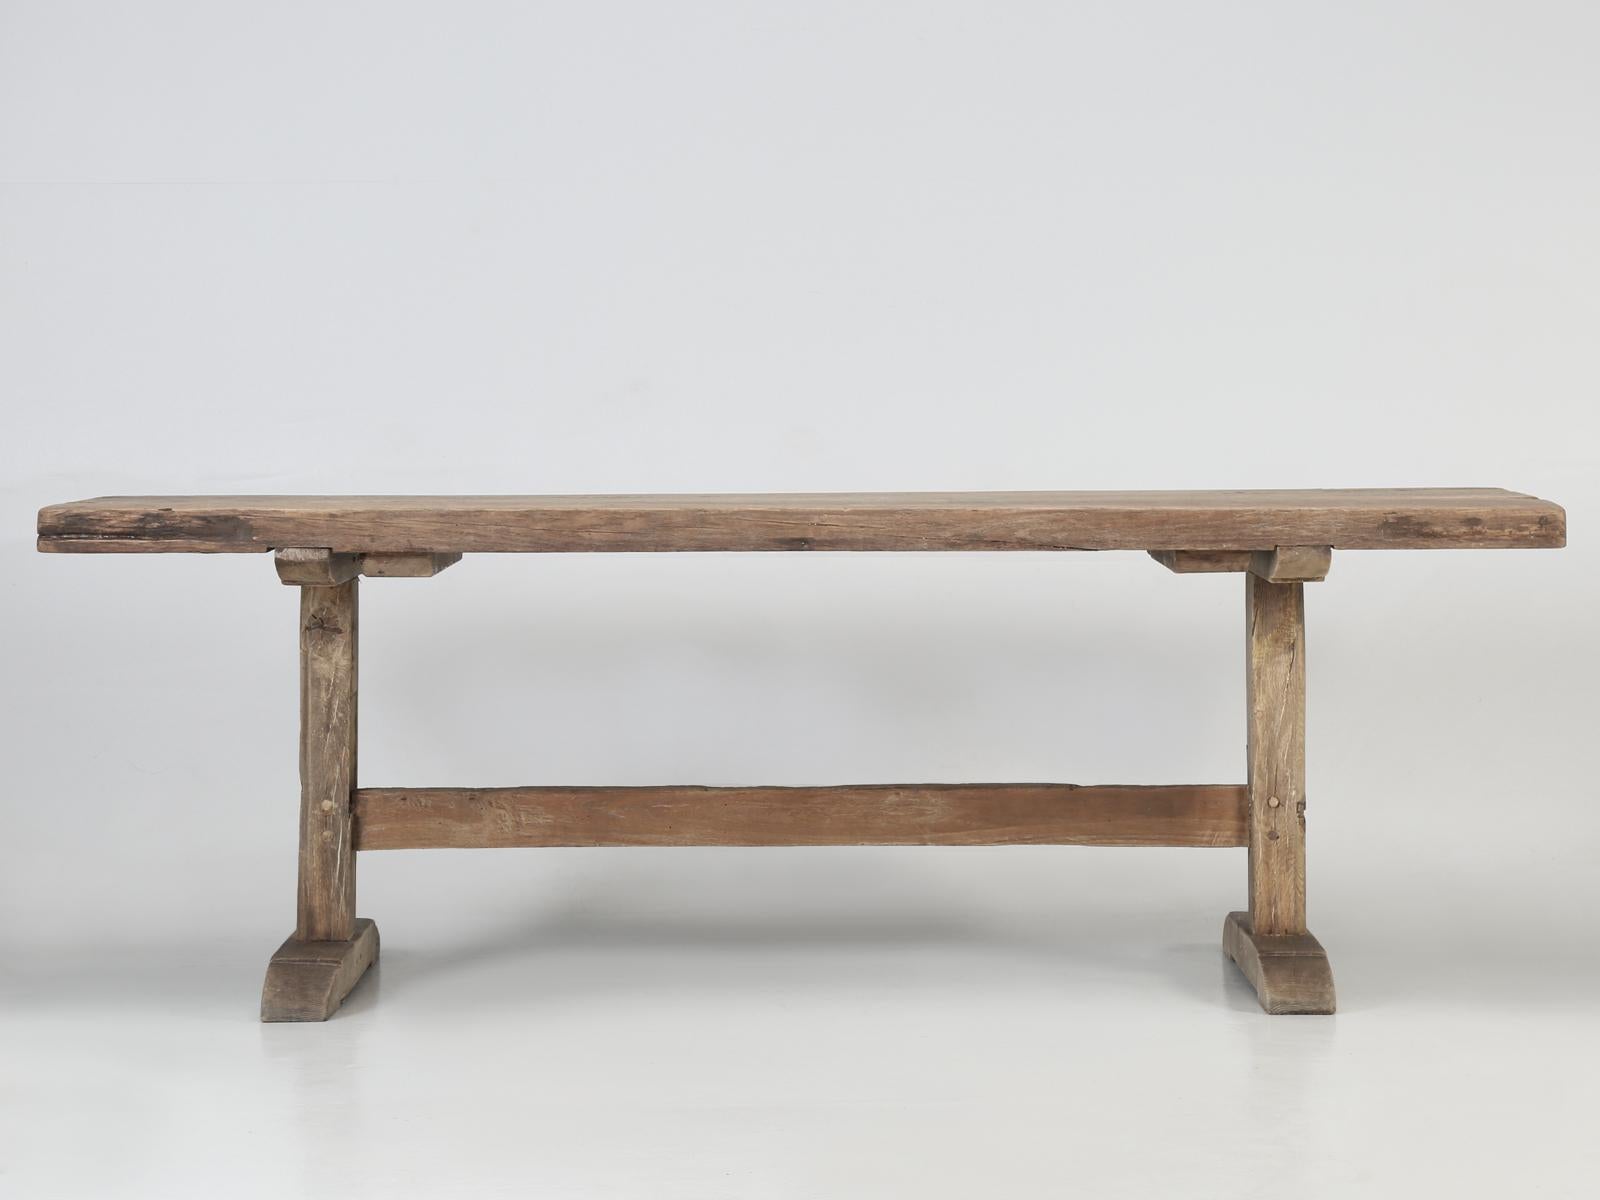 Antique Country French Rustic Trestle Dining Table in White Oak from the 1700s 7